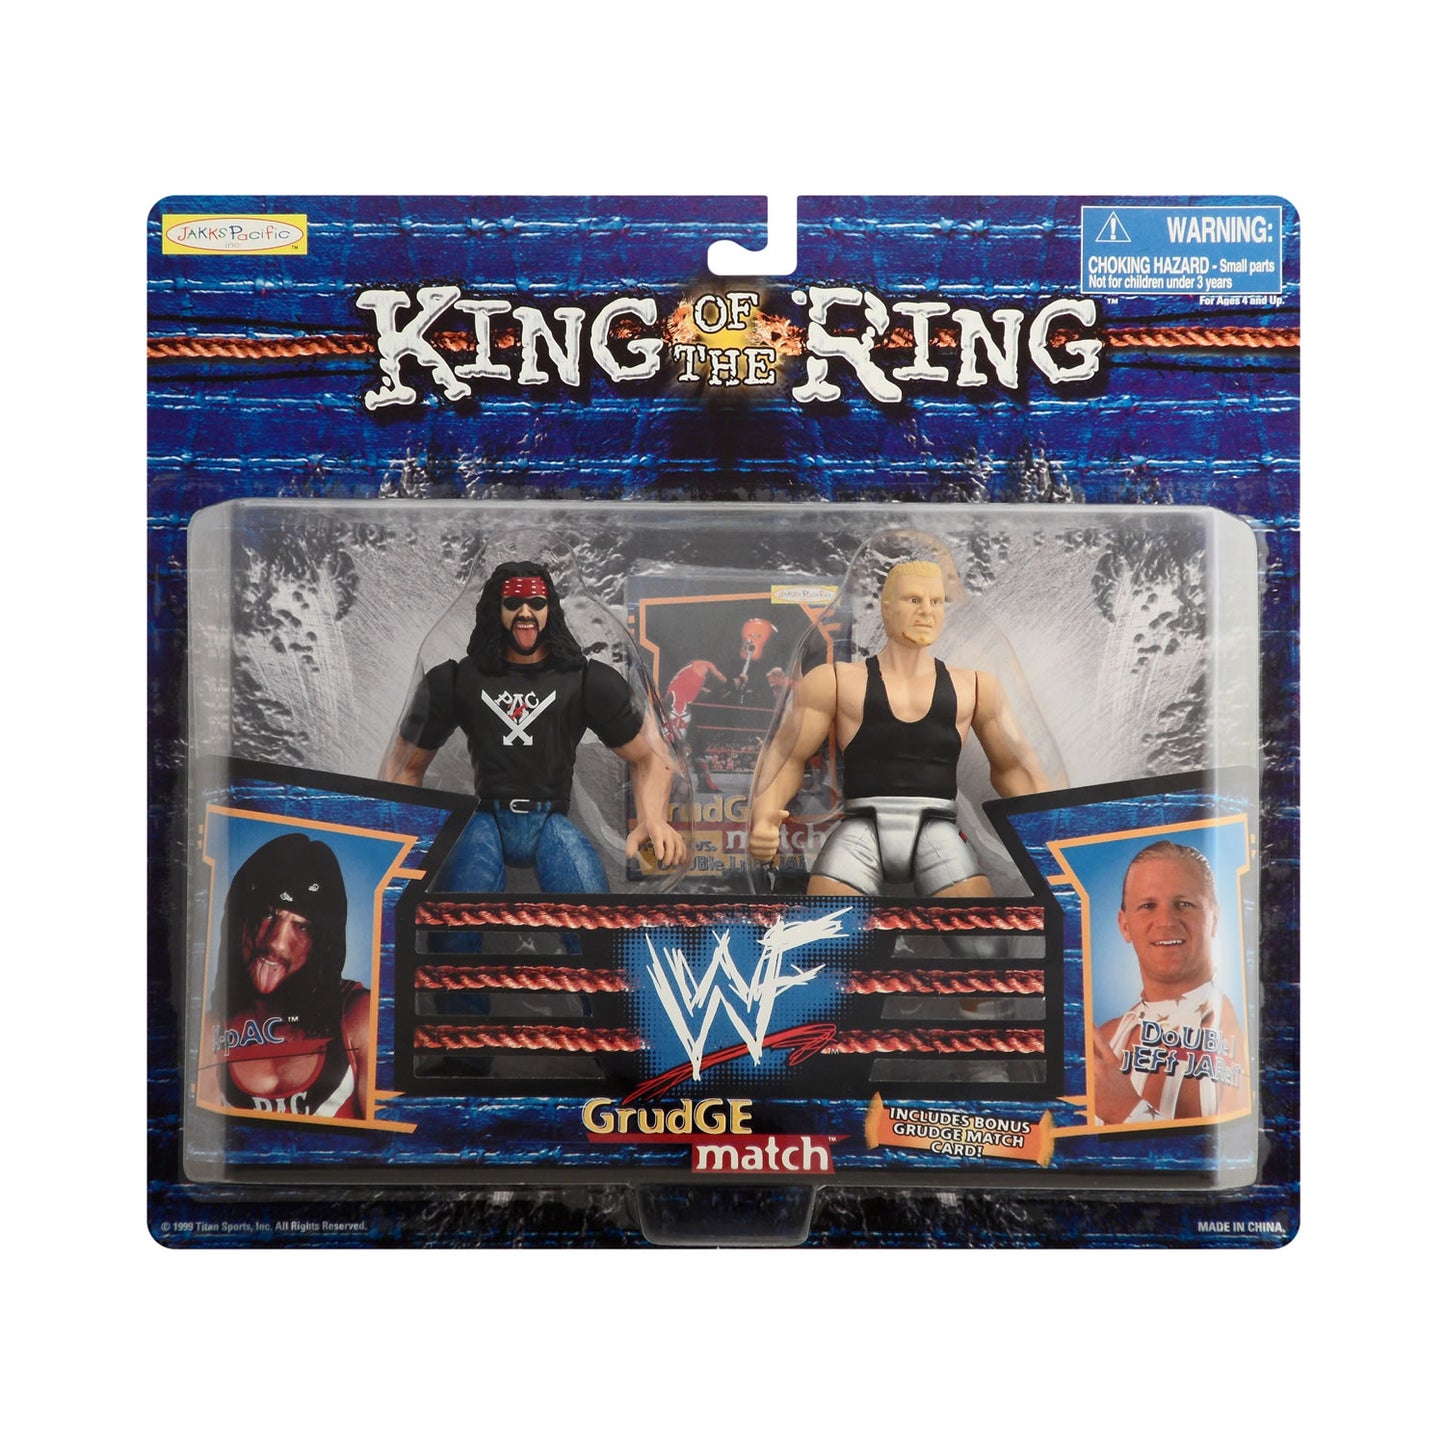 WWF King of the Ring Grudge Match X-Pac vs. Double J Jeff Jarett Action Figure 2-Pack